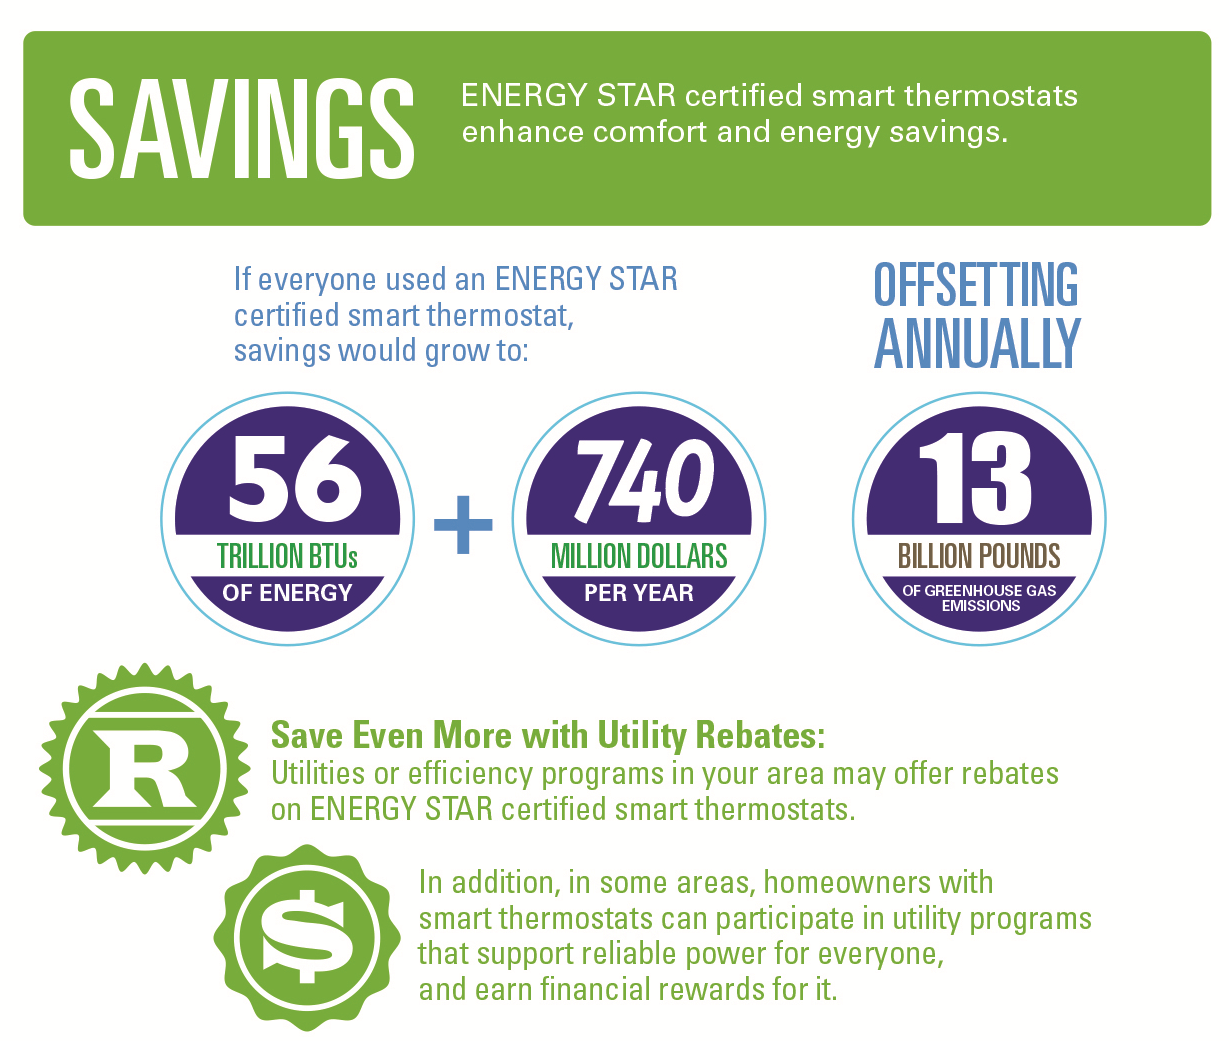 ENERGY STAR certified smart thermostat savings